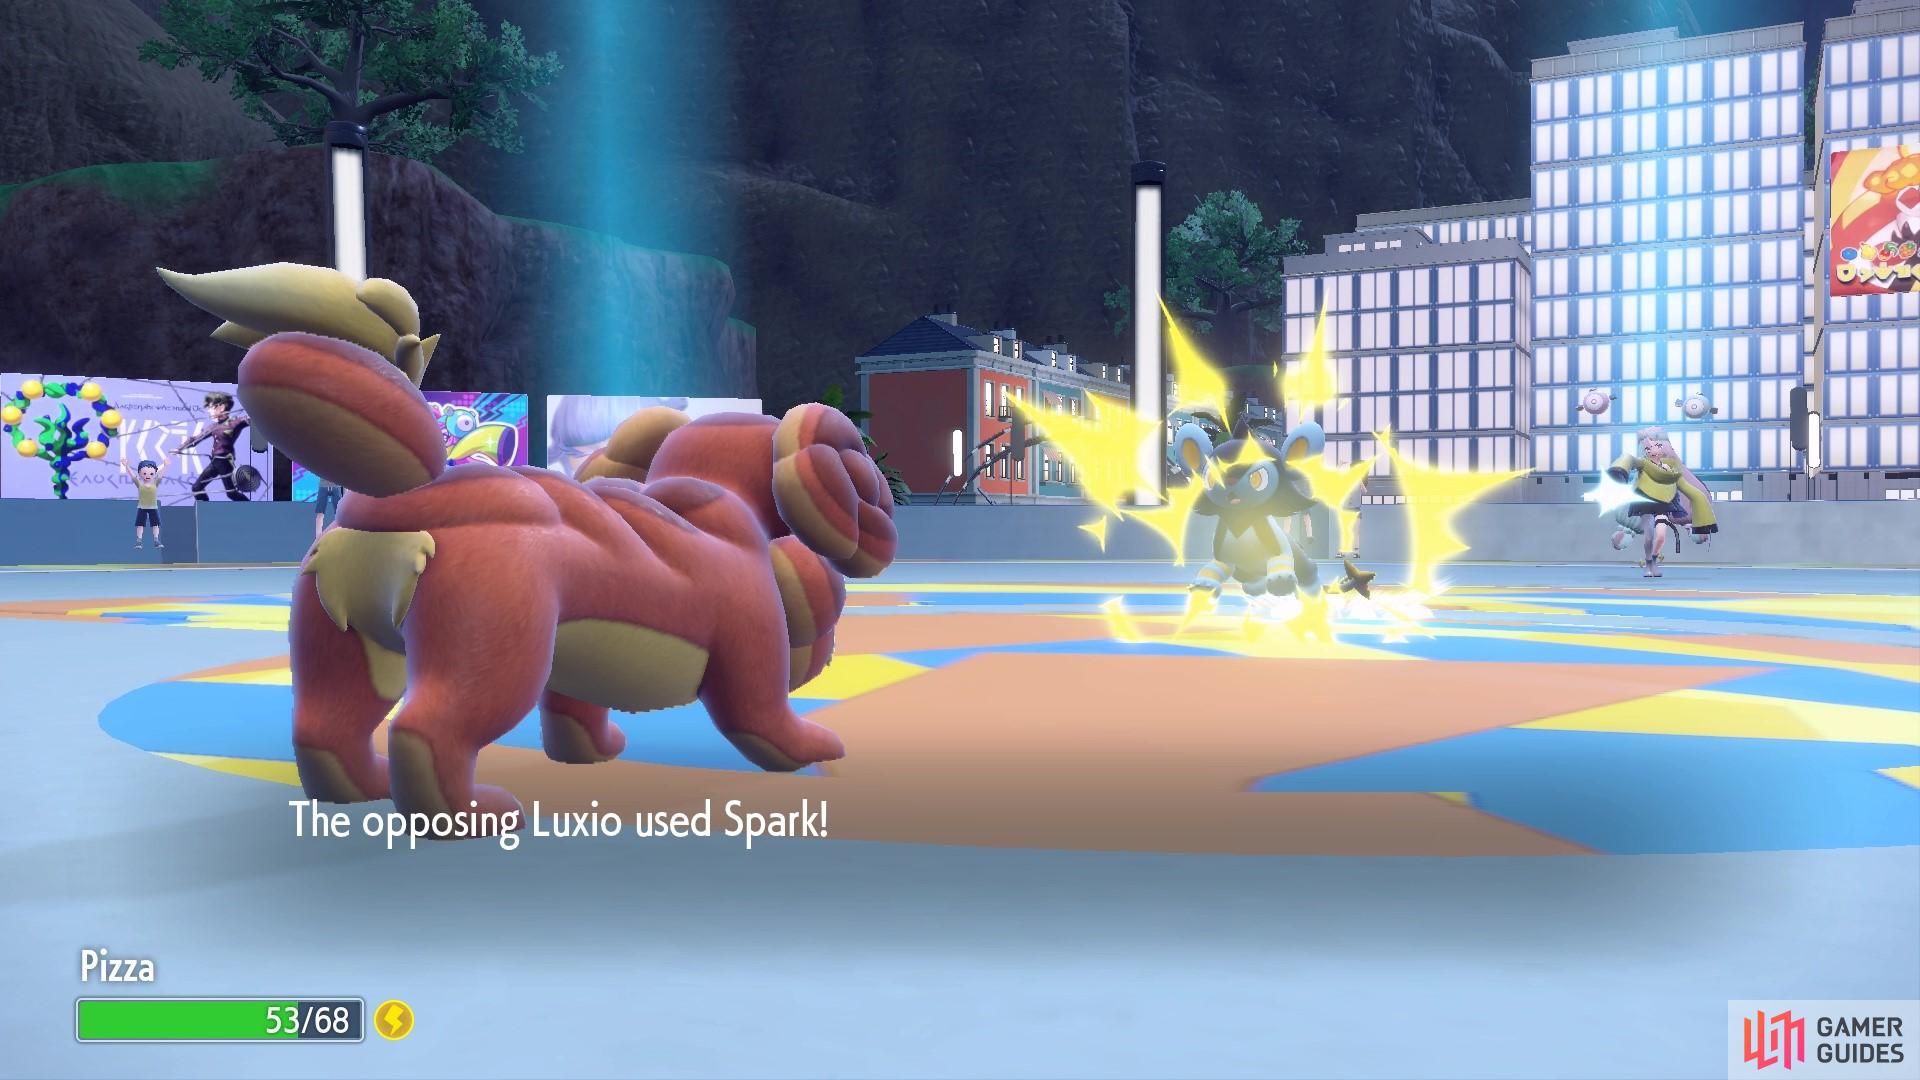 Luxio will charge at your Pokémon using Spark.